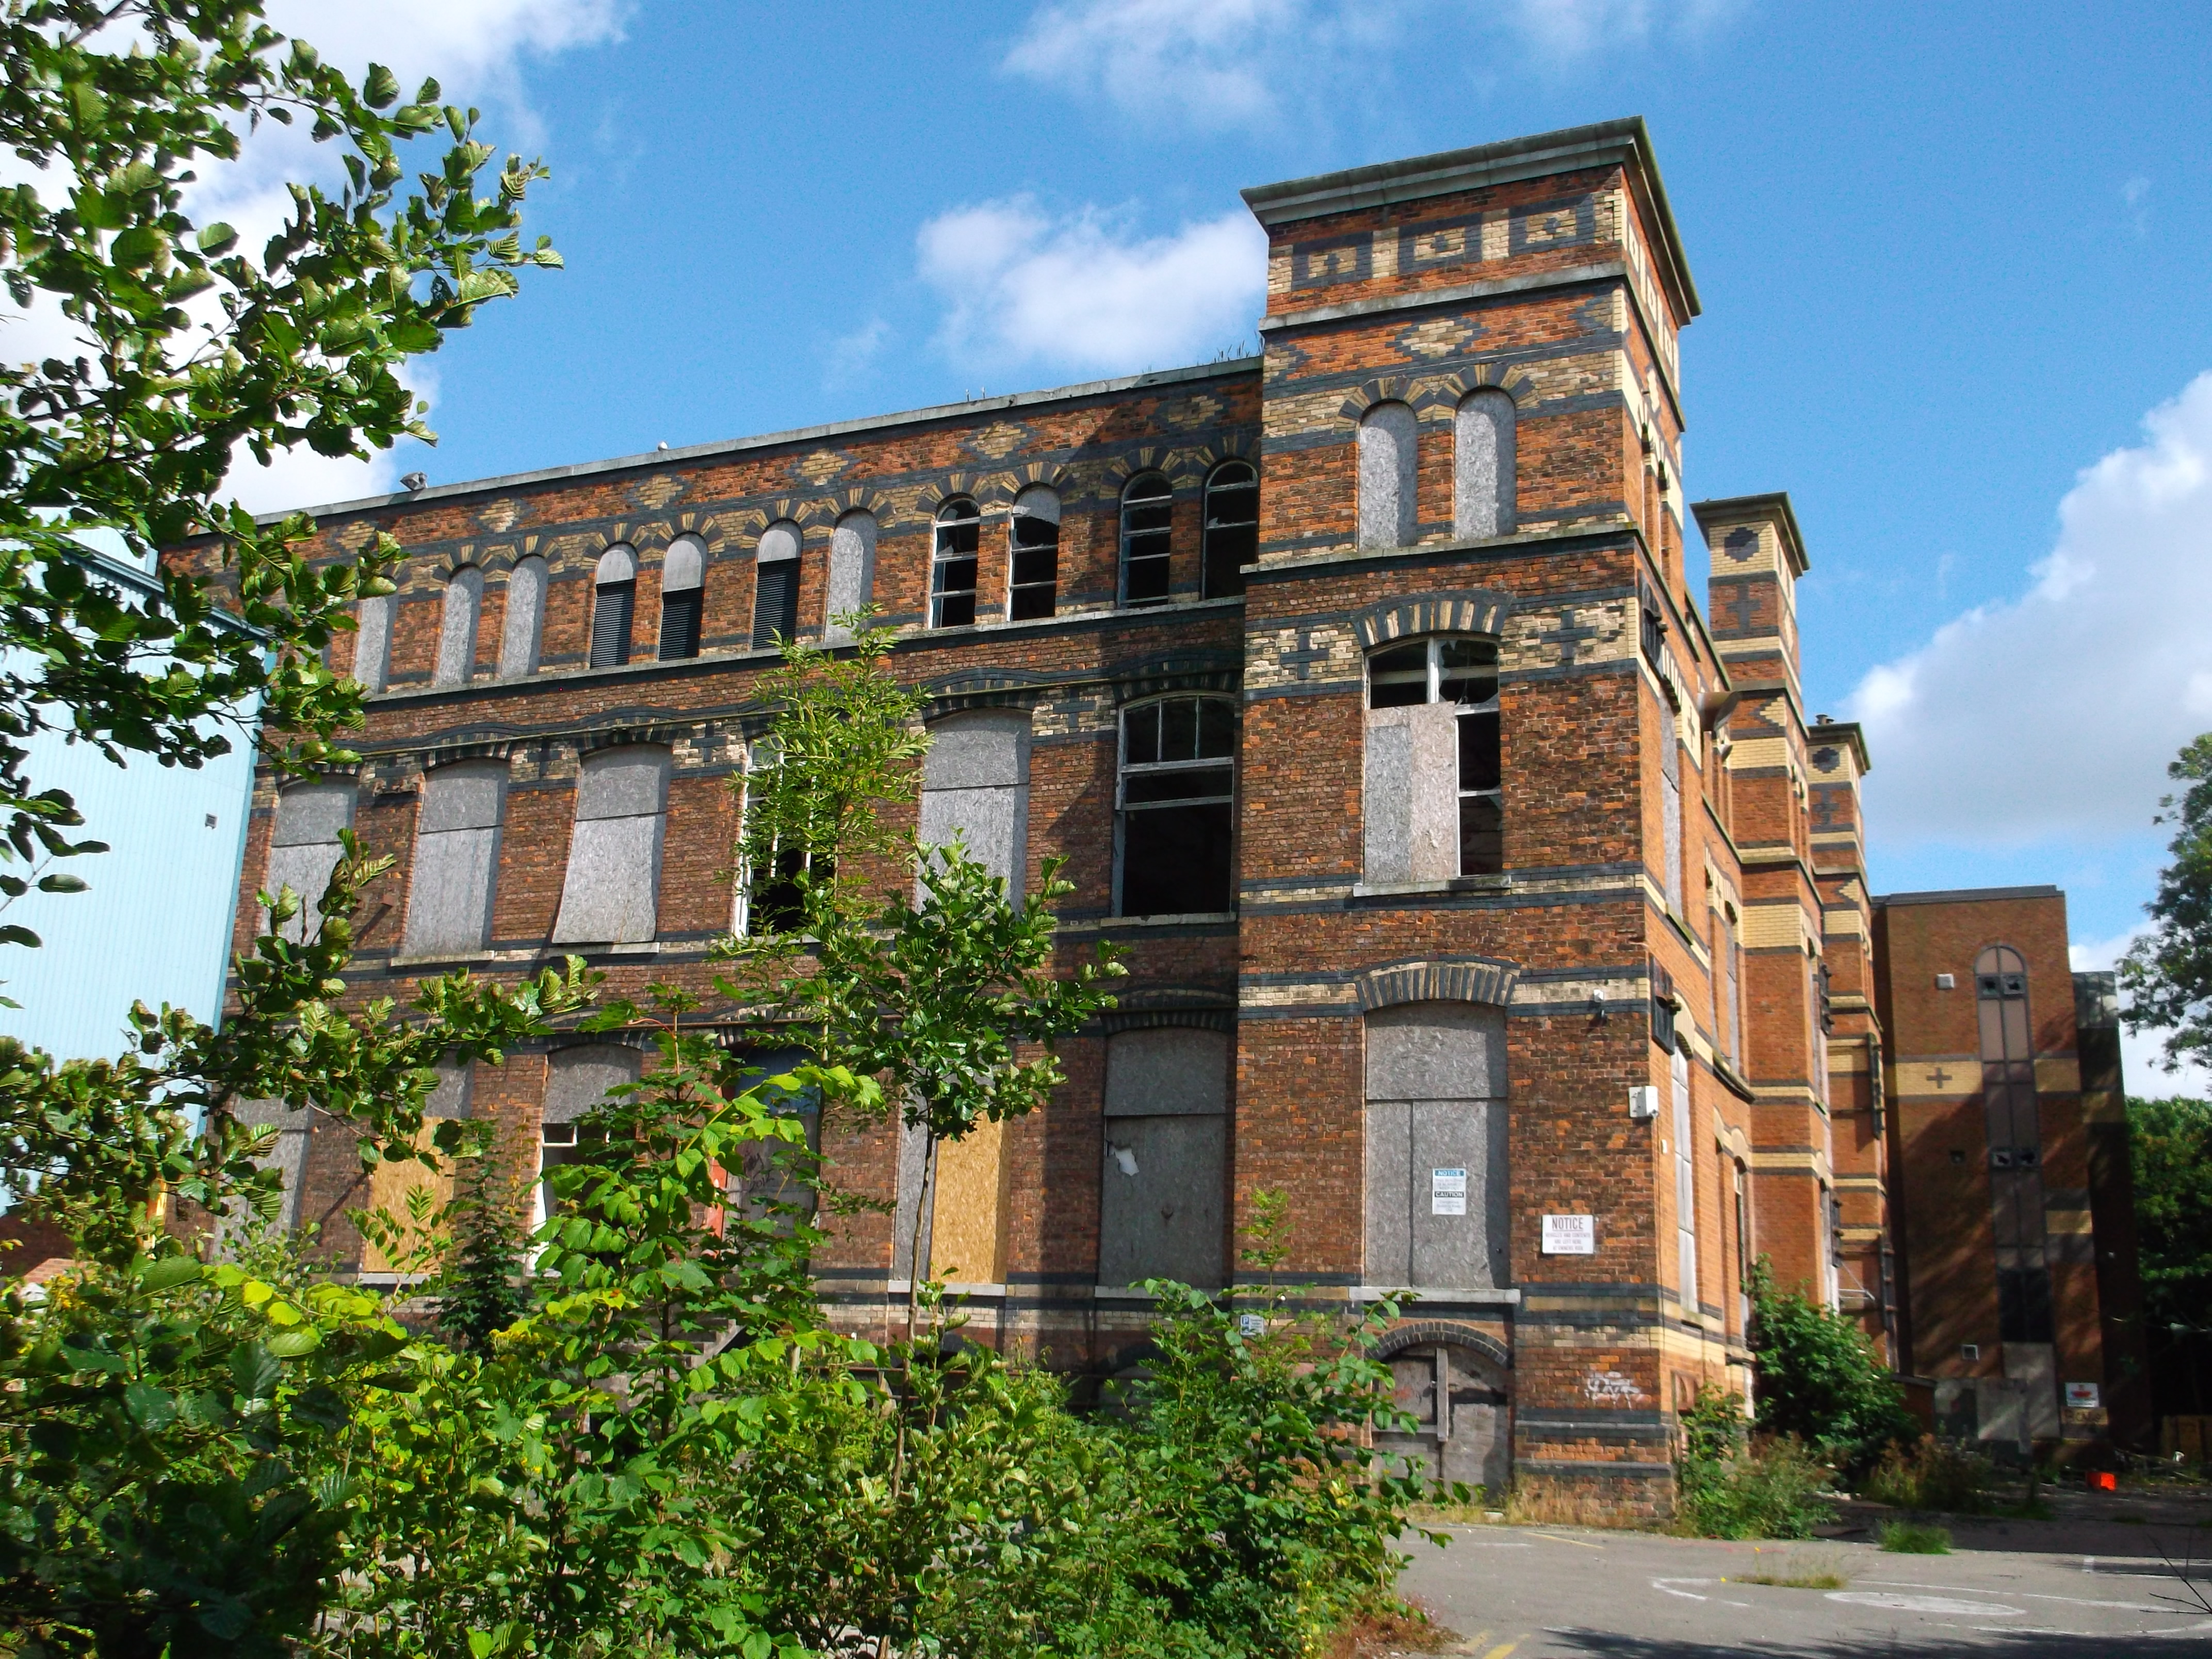 Pagefield Building of Wigan College of Technology (Gidlow Mill)